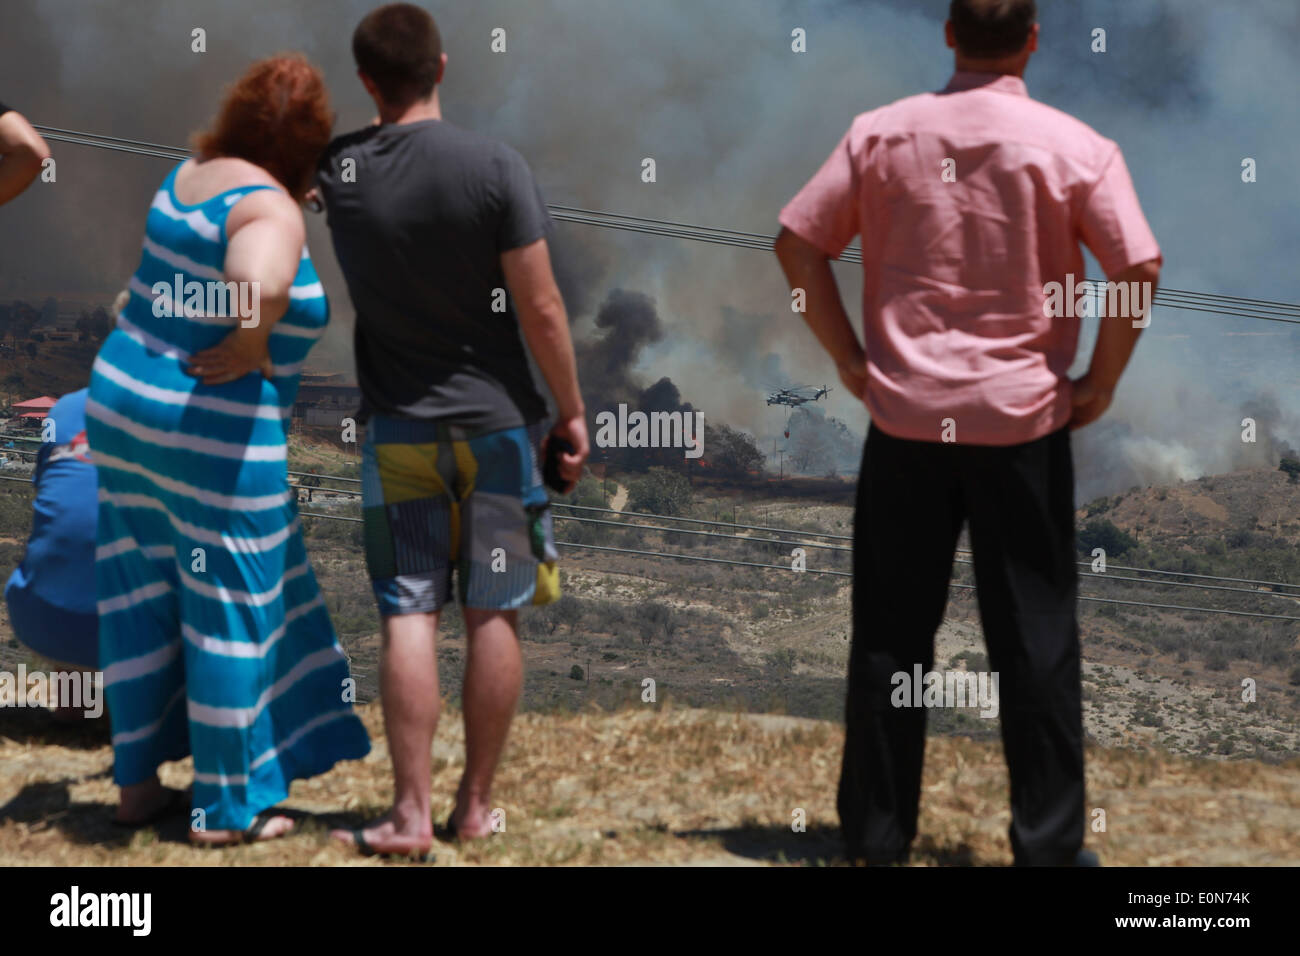 San Clemente, California, USA. 16th May, 2014. San Clemente residents watch fire fighting helicopters douse water on the Las Pulgas wildfire burns Camp Pendleton marine Base. The wildfire in the western region of Camp Pendleton has grown to 8,000 acres burned, base officials confirmed, known as the Las Pulgas Fire, is 5 percent contained, officials said. California firefighters have continued to battle wildfires, which have scorched more than 11,000 acres and caused thousands to evacuate. Credit:  ZUMA Press, Inc./Alamy Live News Stock Photo